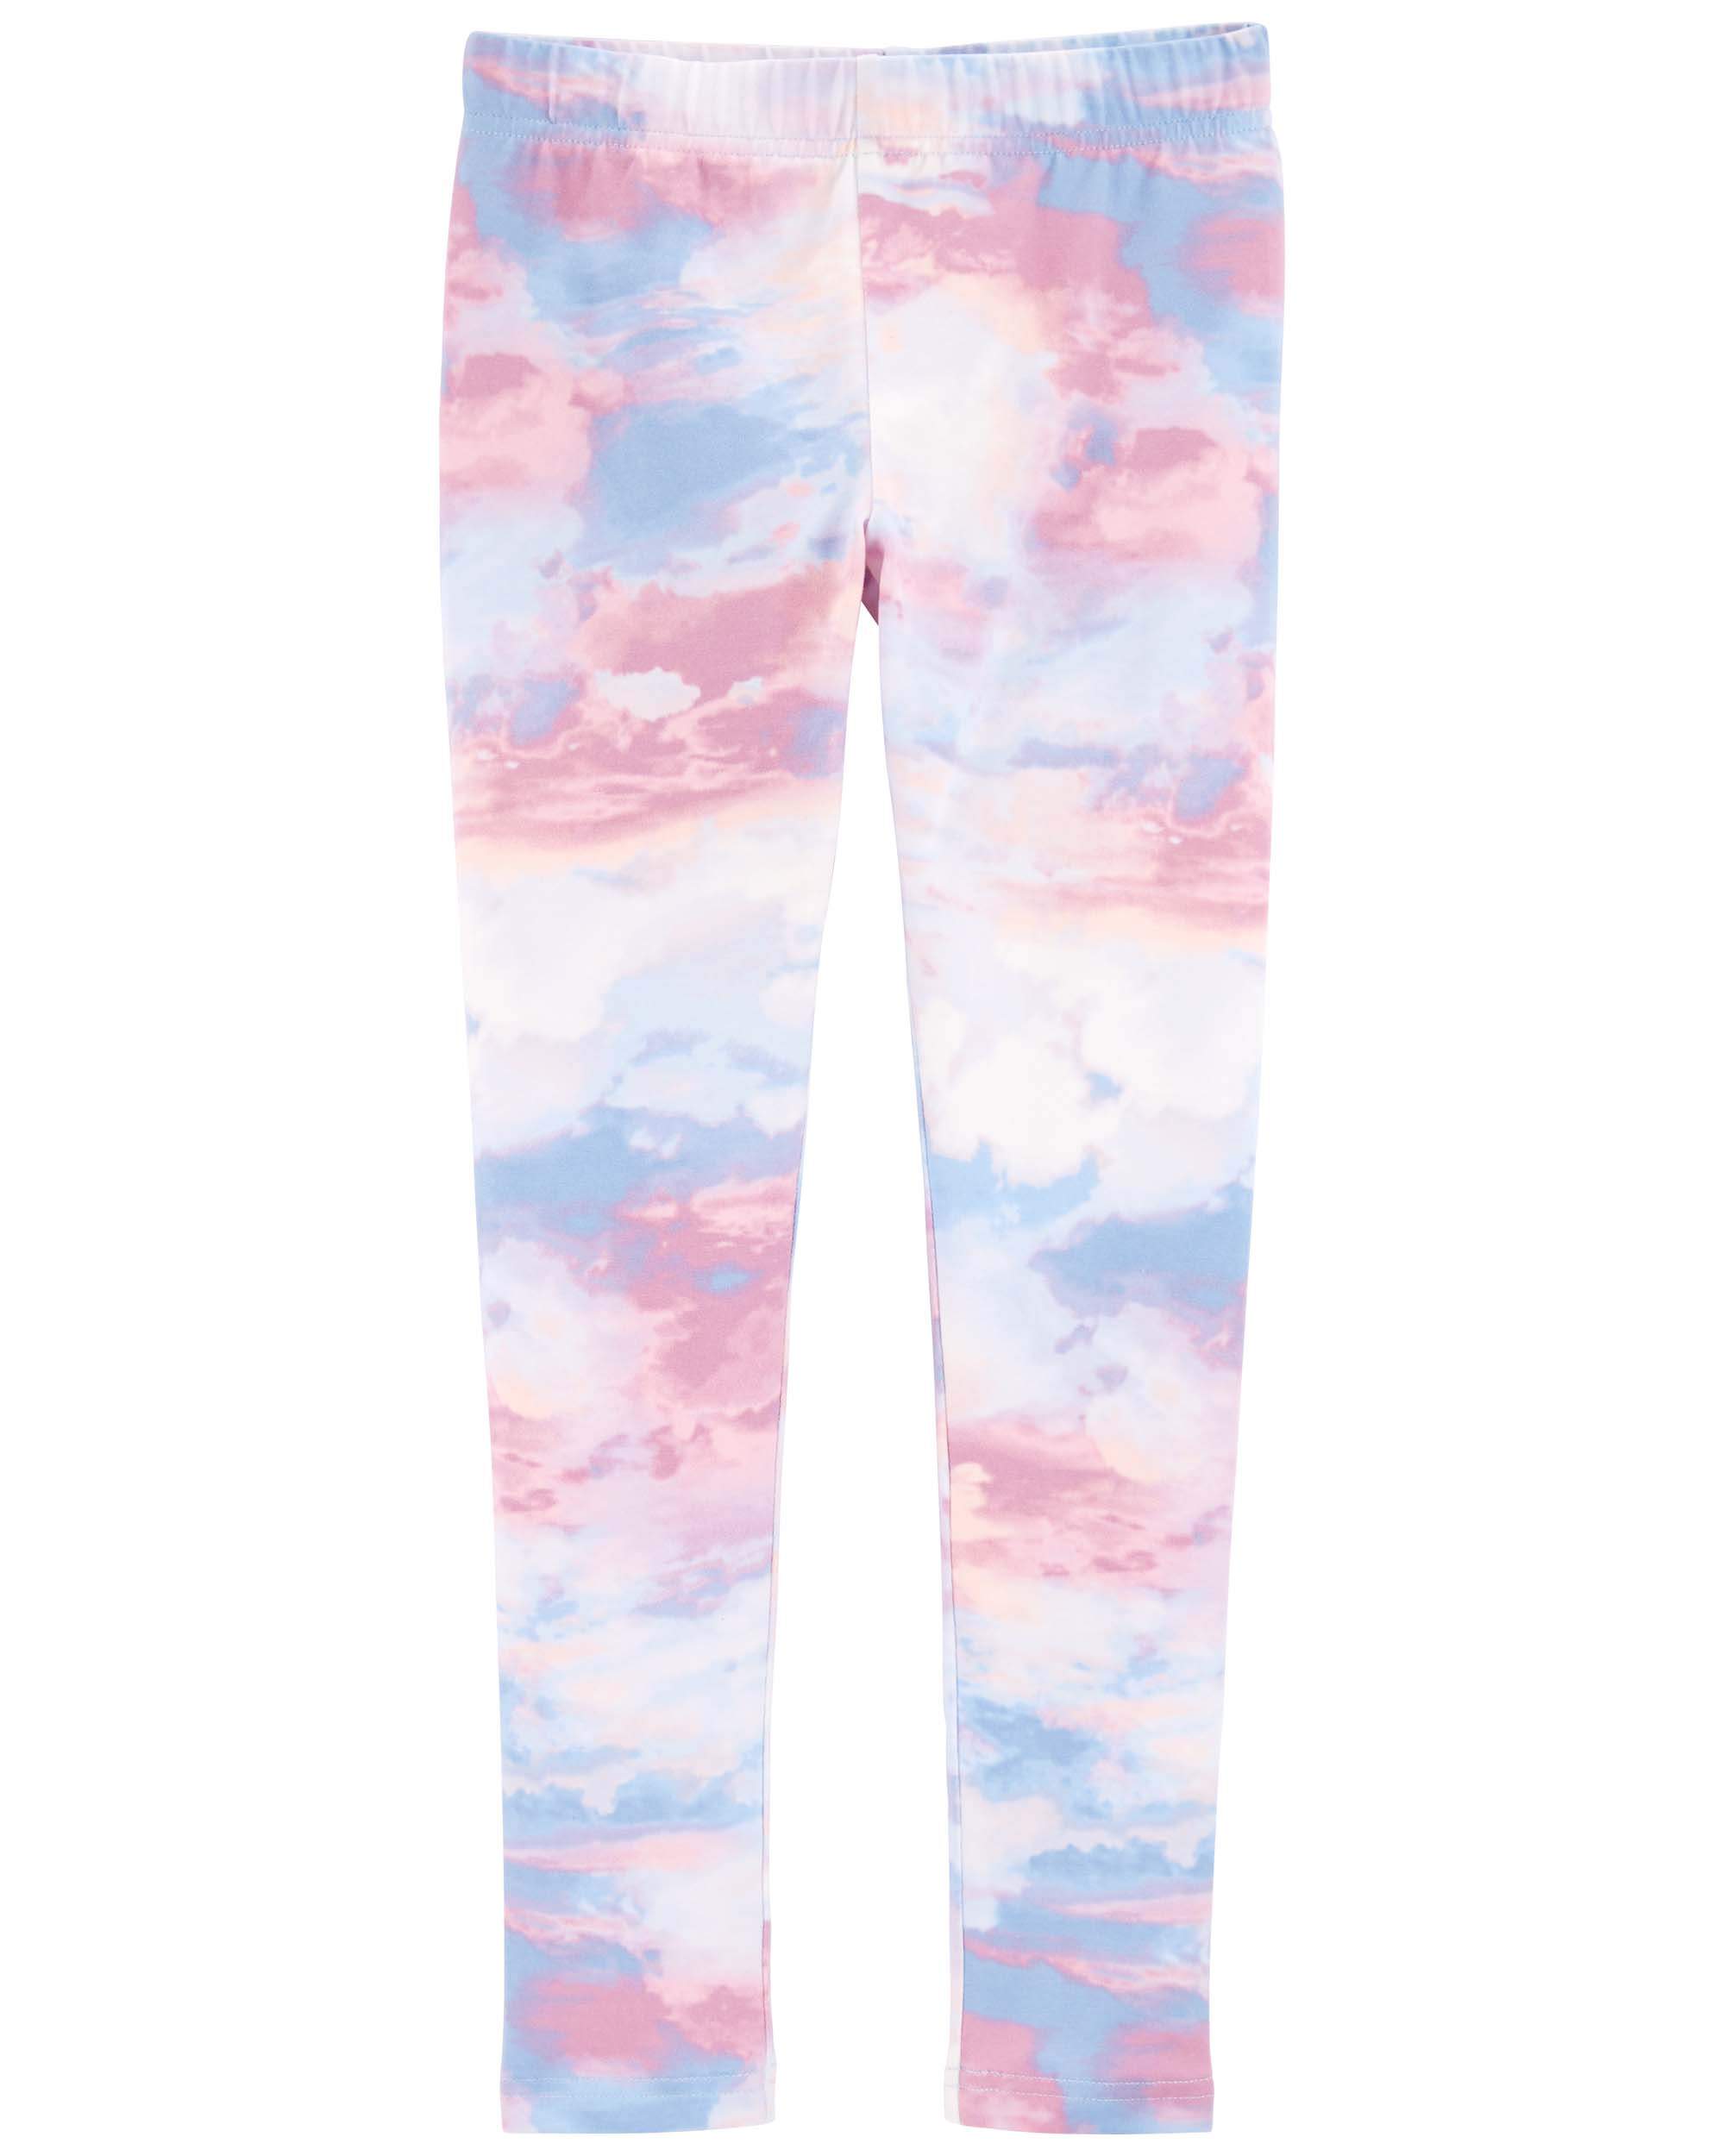 Wild Cat Pastel Pink, Yellow, and Blue Tie Dye Leggings, Size 1X – The Plus  Bus Boutique